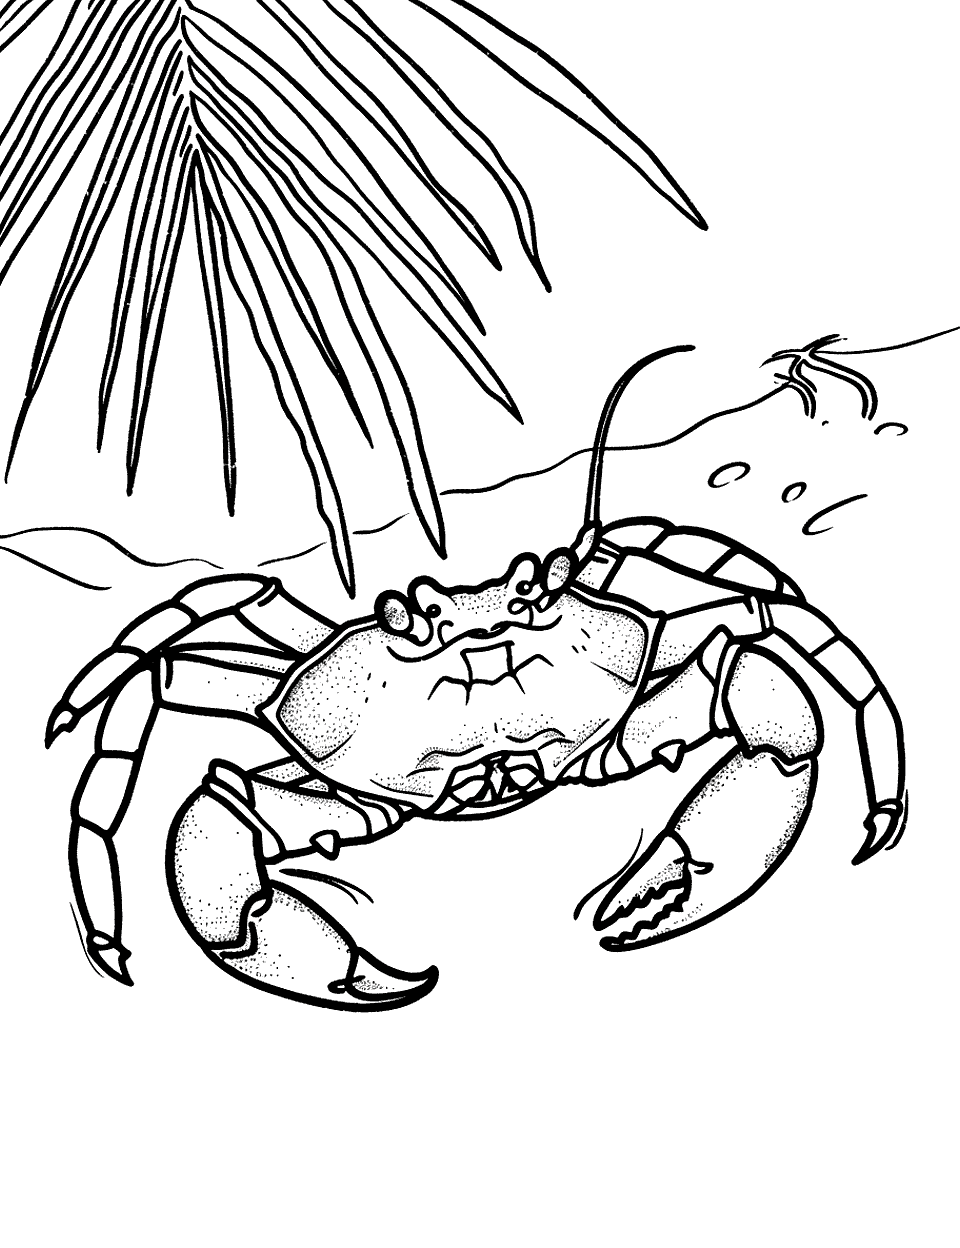 Crab and Palm Tree Coloring Page - A crab resting under the leaf of a palm tree, providing a cool retreat from the sunny beach.